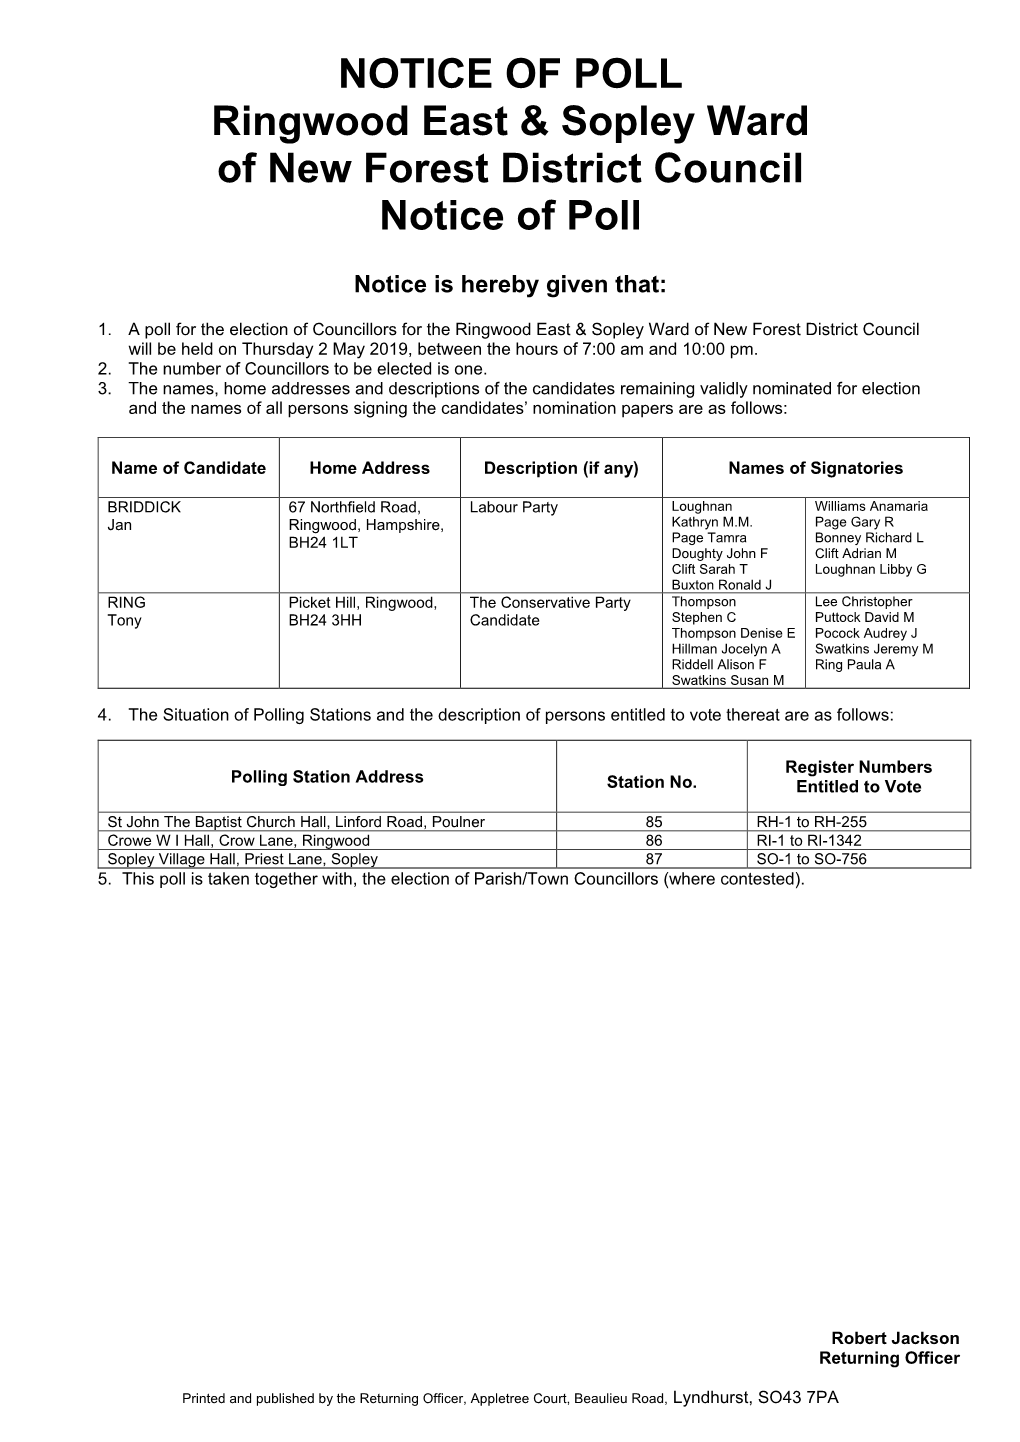 NOTICE of POLL Ringwood East & Sopley Ward of New Forest District